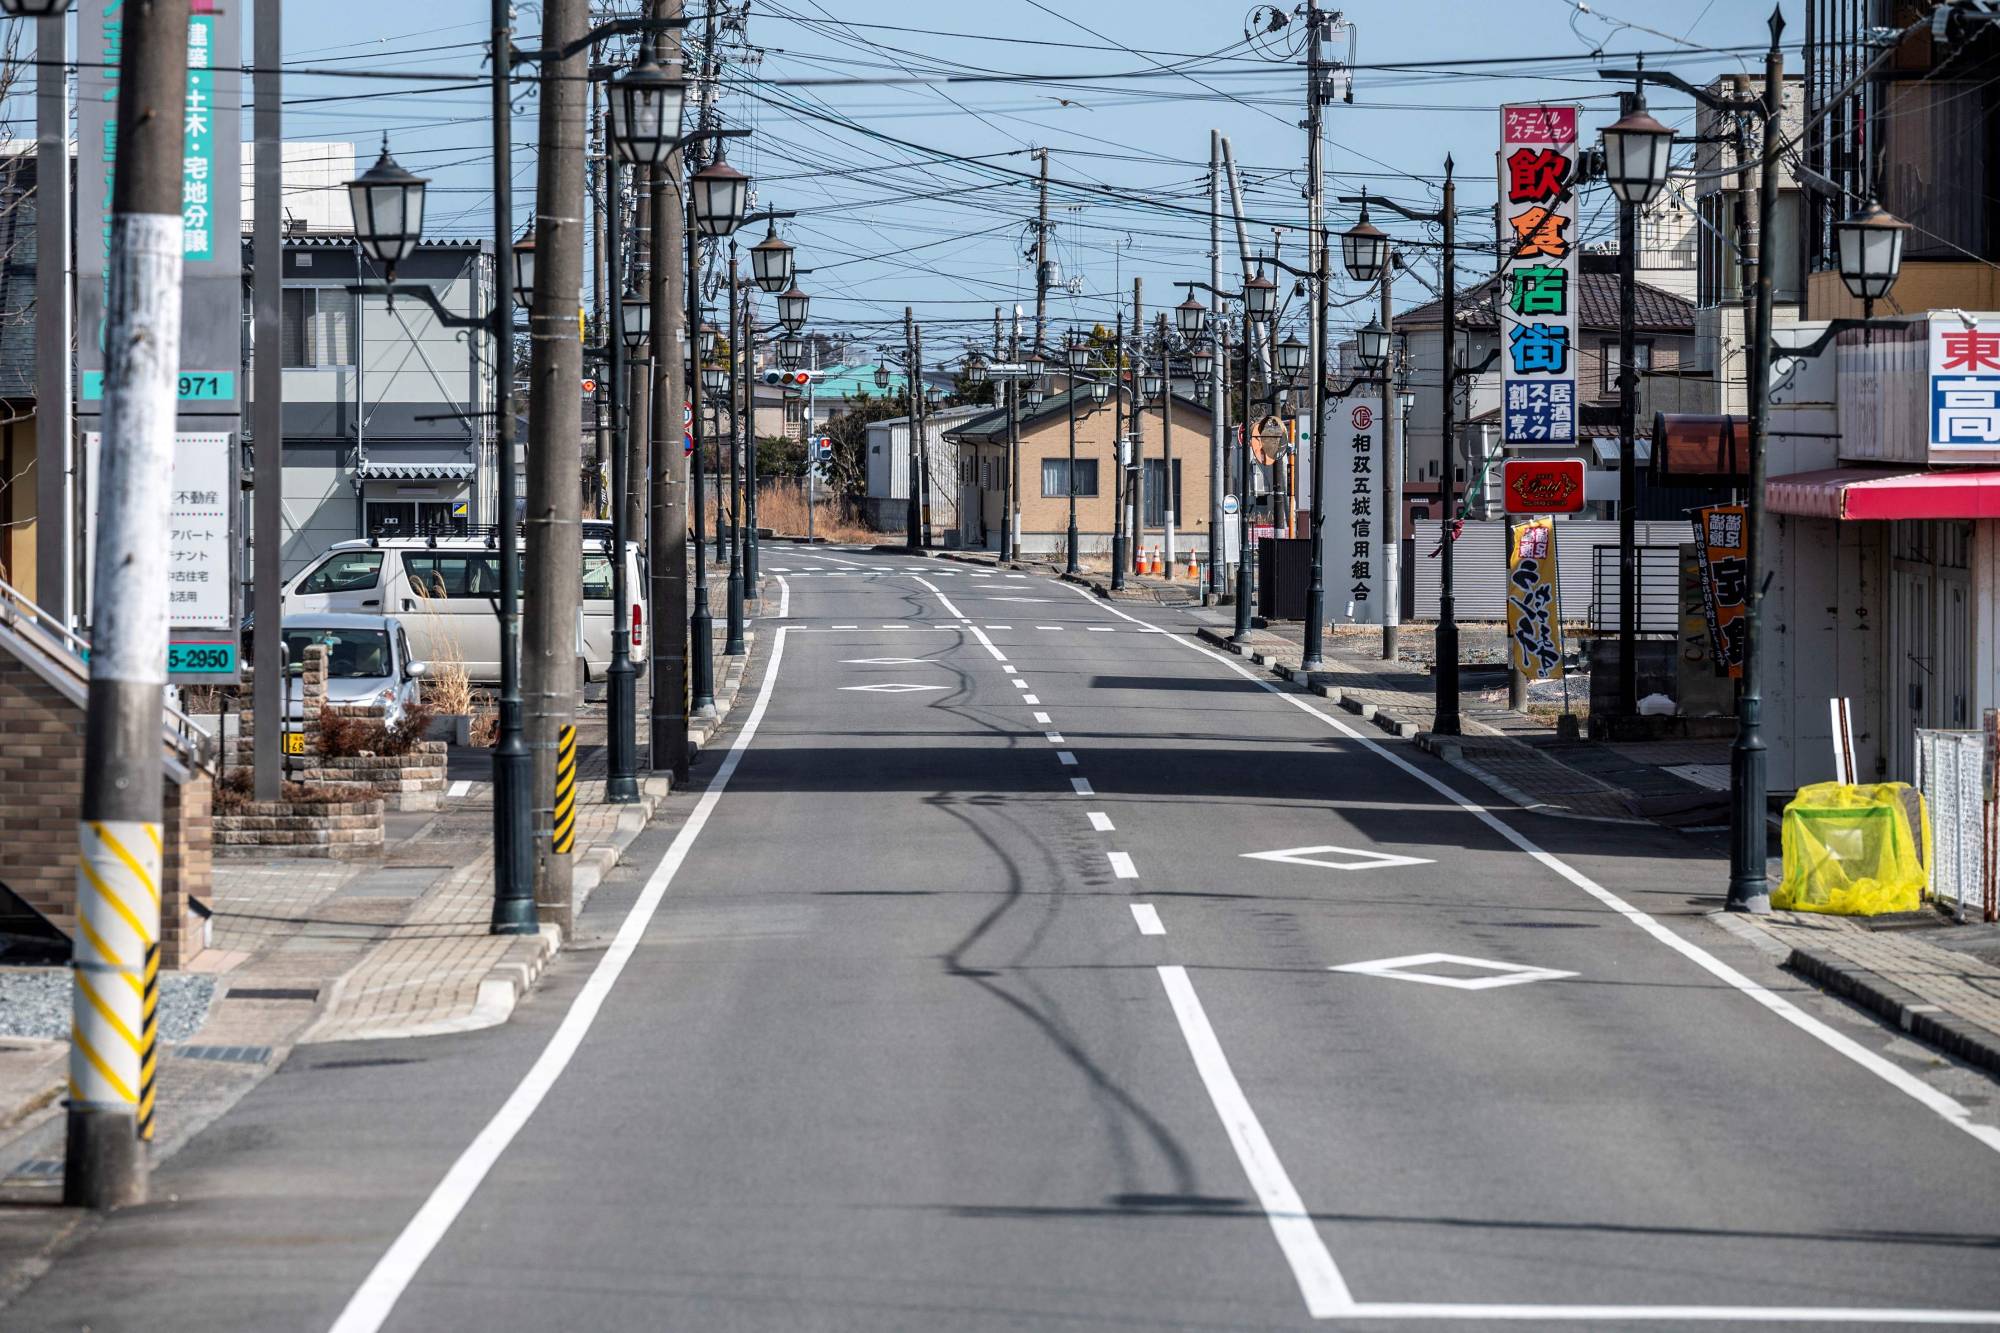 The town of Namie, Fukushima Prefecture was placed in the exclusion zone around the Fukushima No. 1 plant after the March 11, 2011, nuclear disaster. The town, with its main street seen here, has since partially reopened.  | AFP-JIJI 